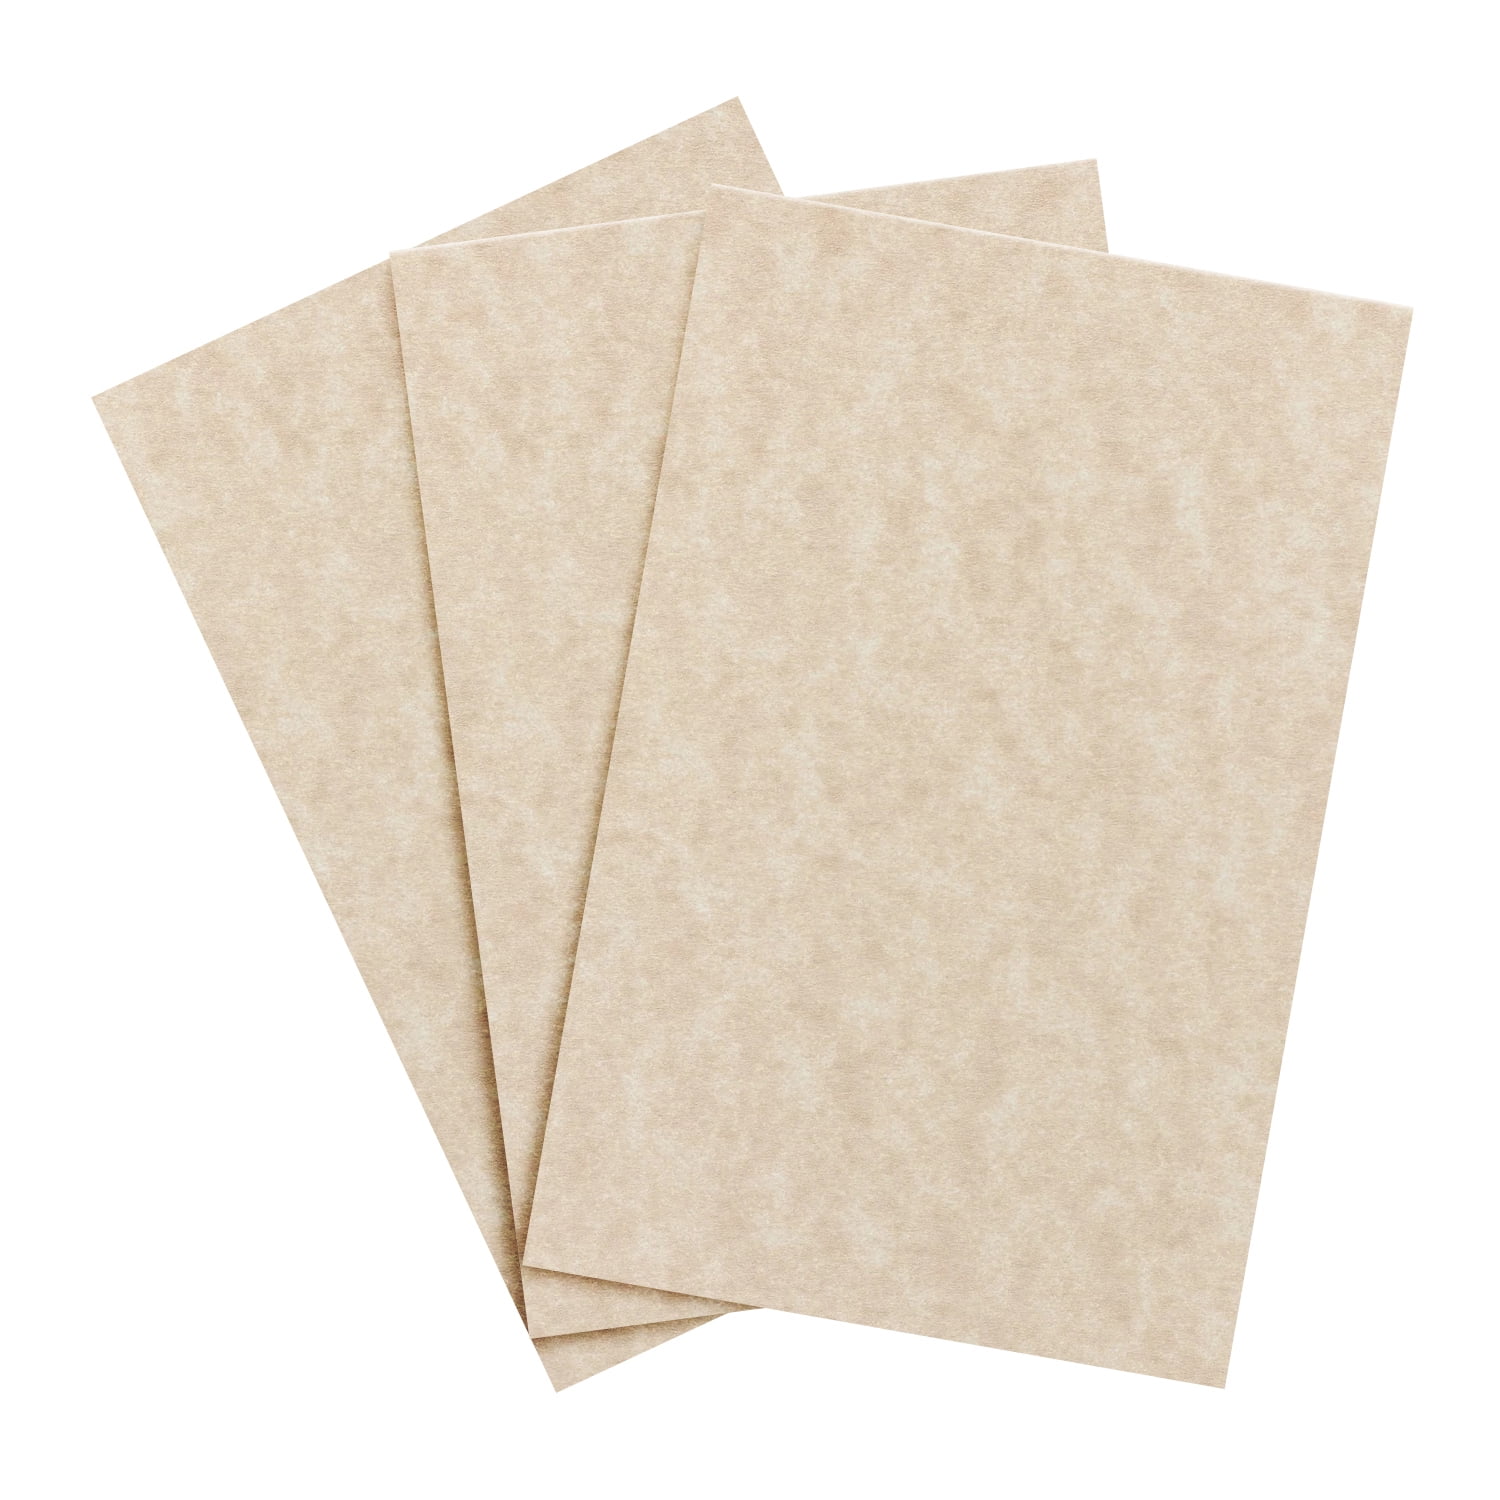 Aged-Look Parchment Stationery Paper for Writing and Printing- 8.5x11 -Bulk Pack of 100 Sheets